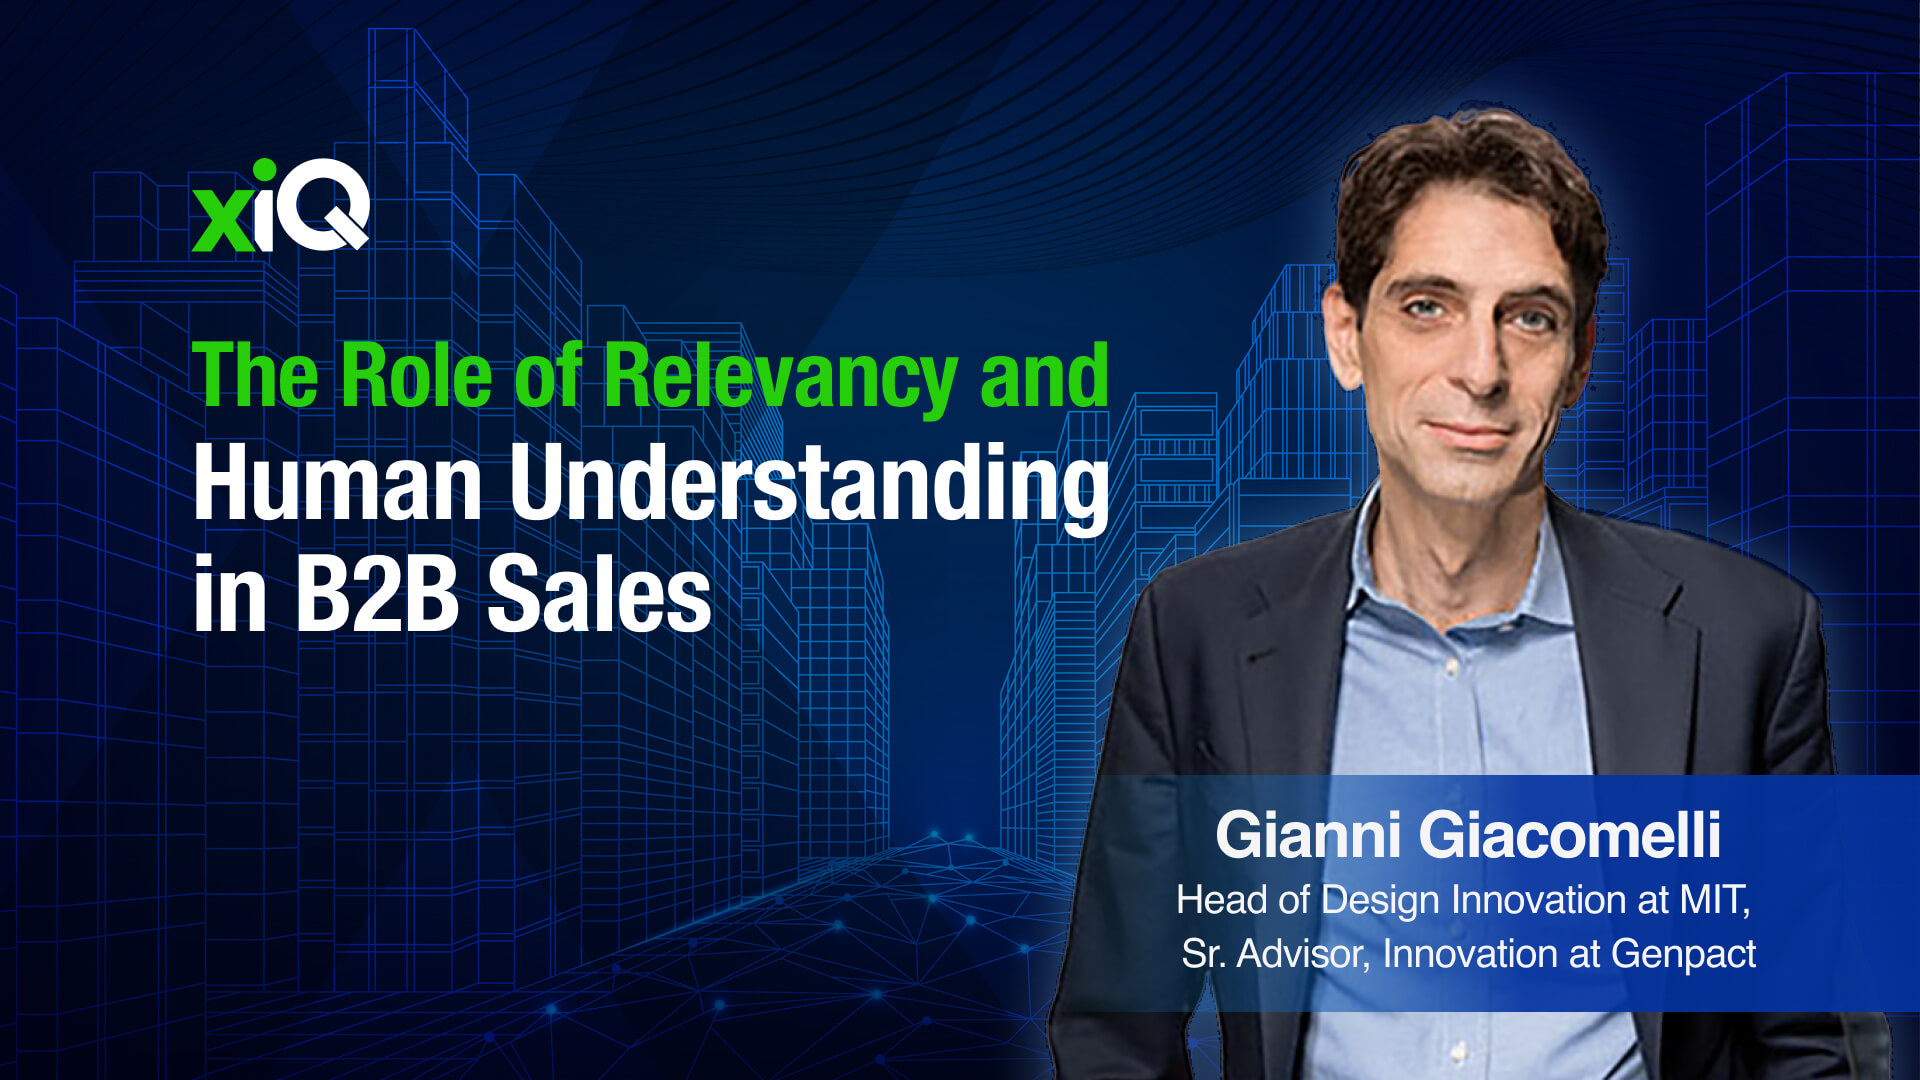 The Role of Relevancy and Human Understanding in B2B Sales